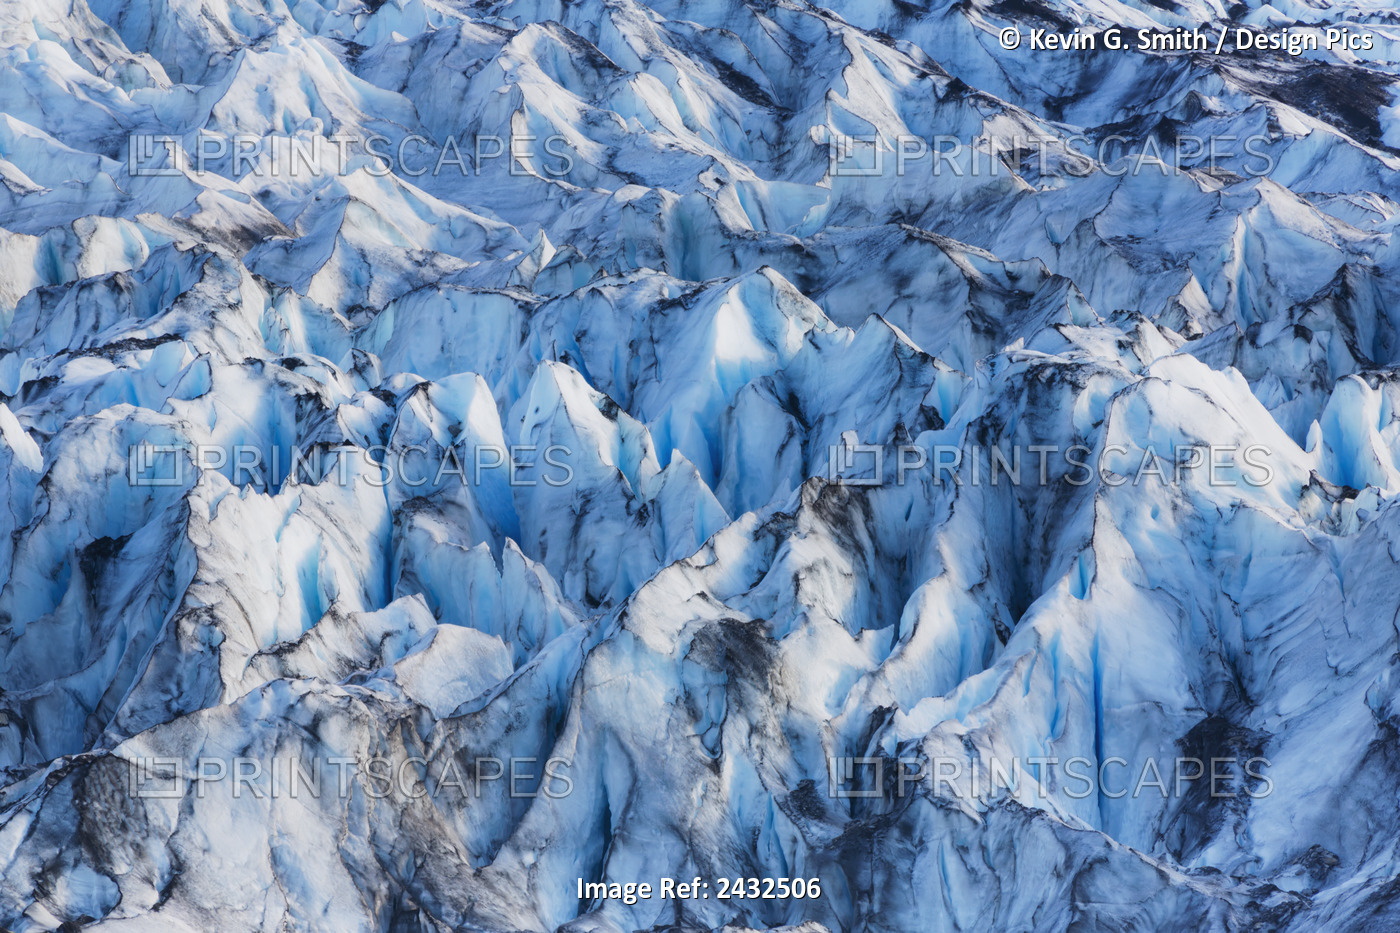 Close Up Of Shoup Glacier Showing Ice With Traces Of Glacial Silt And Dirt On ...